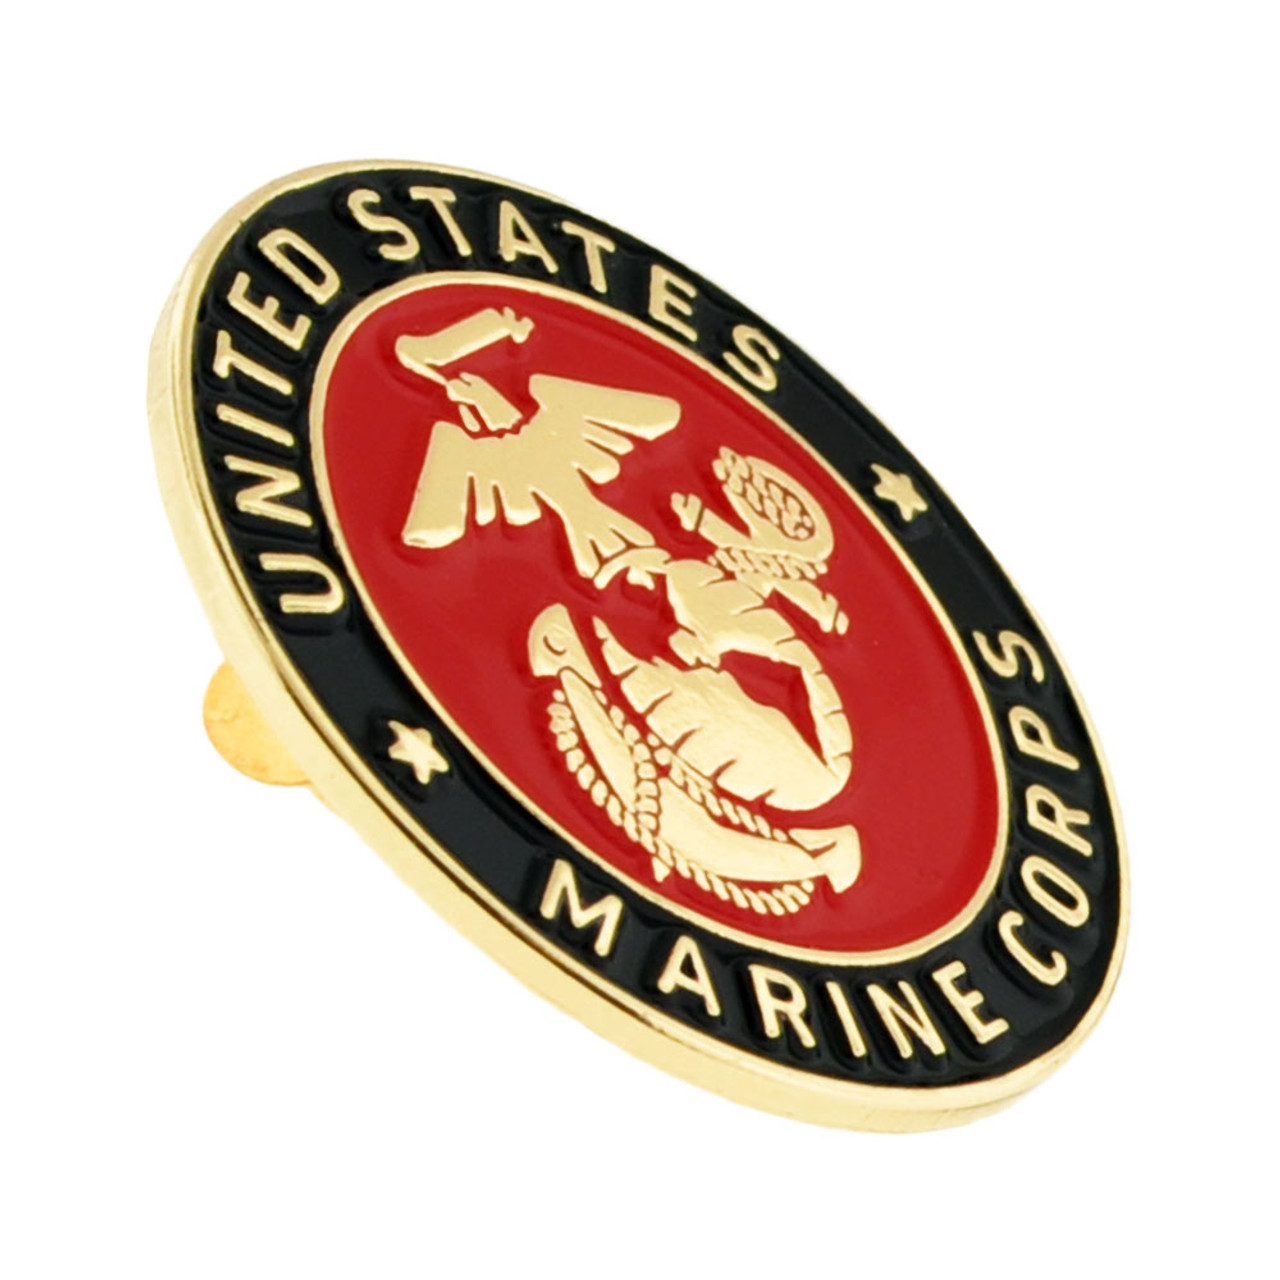  Officially Licensed United States Marine Corps USMC